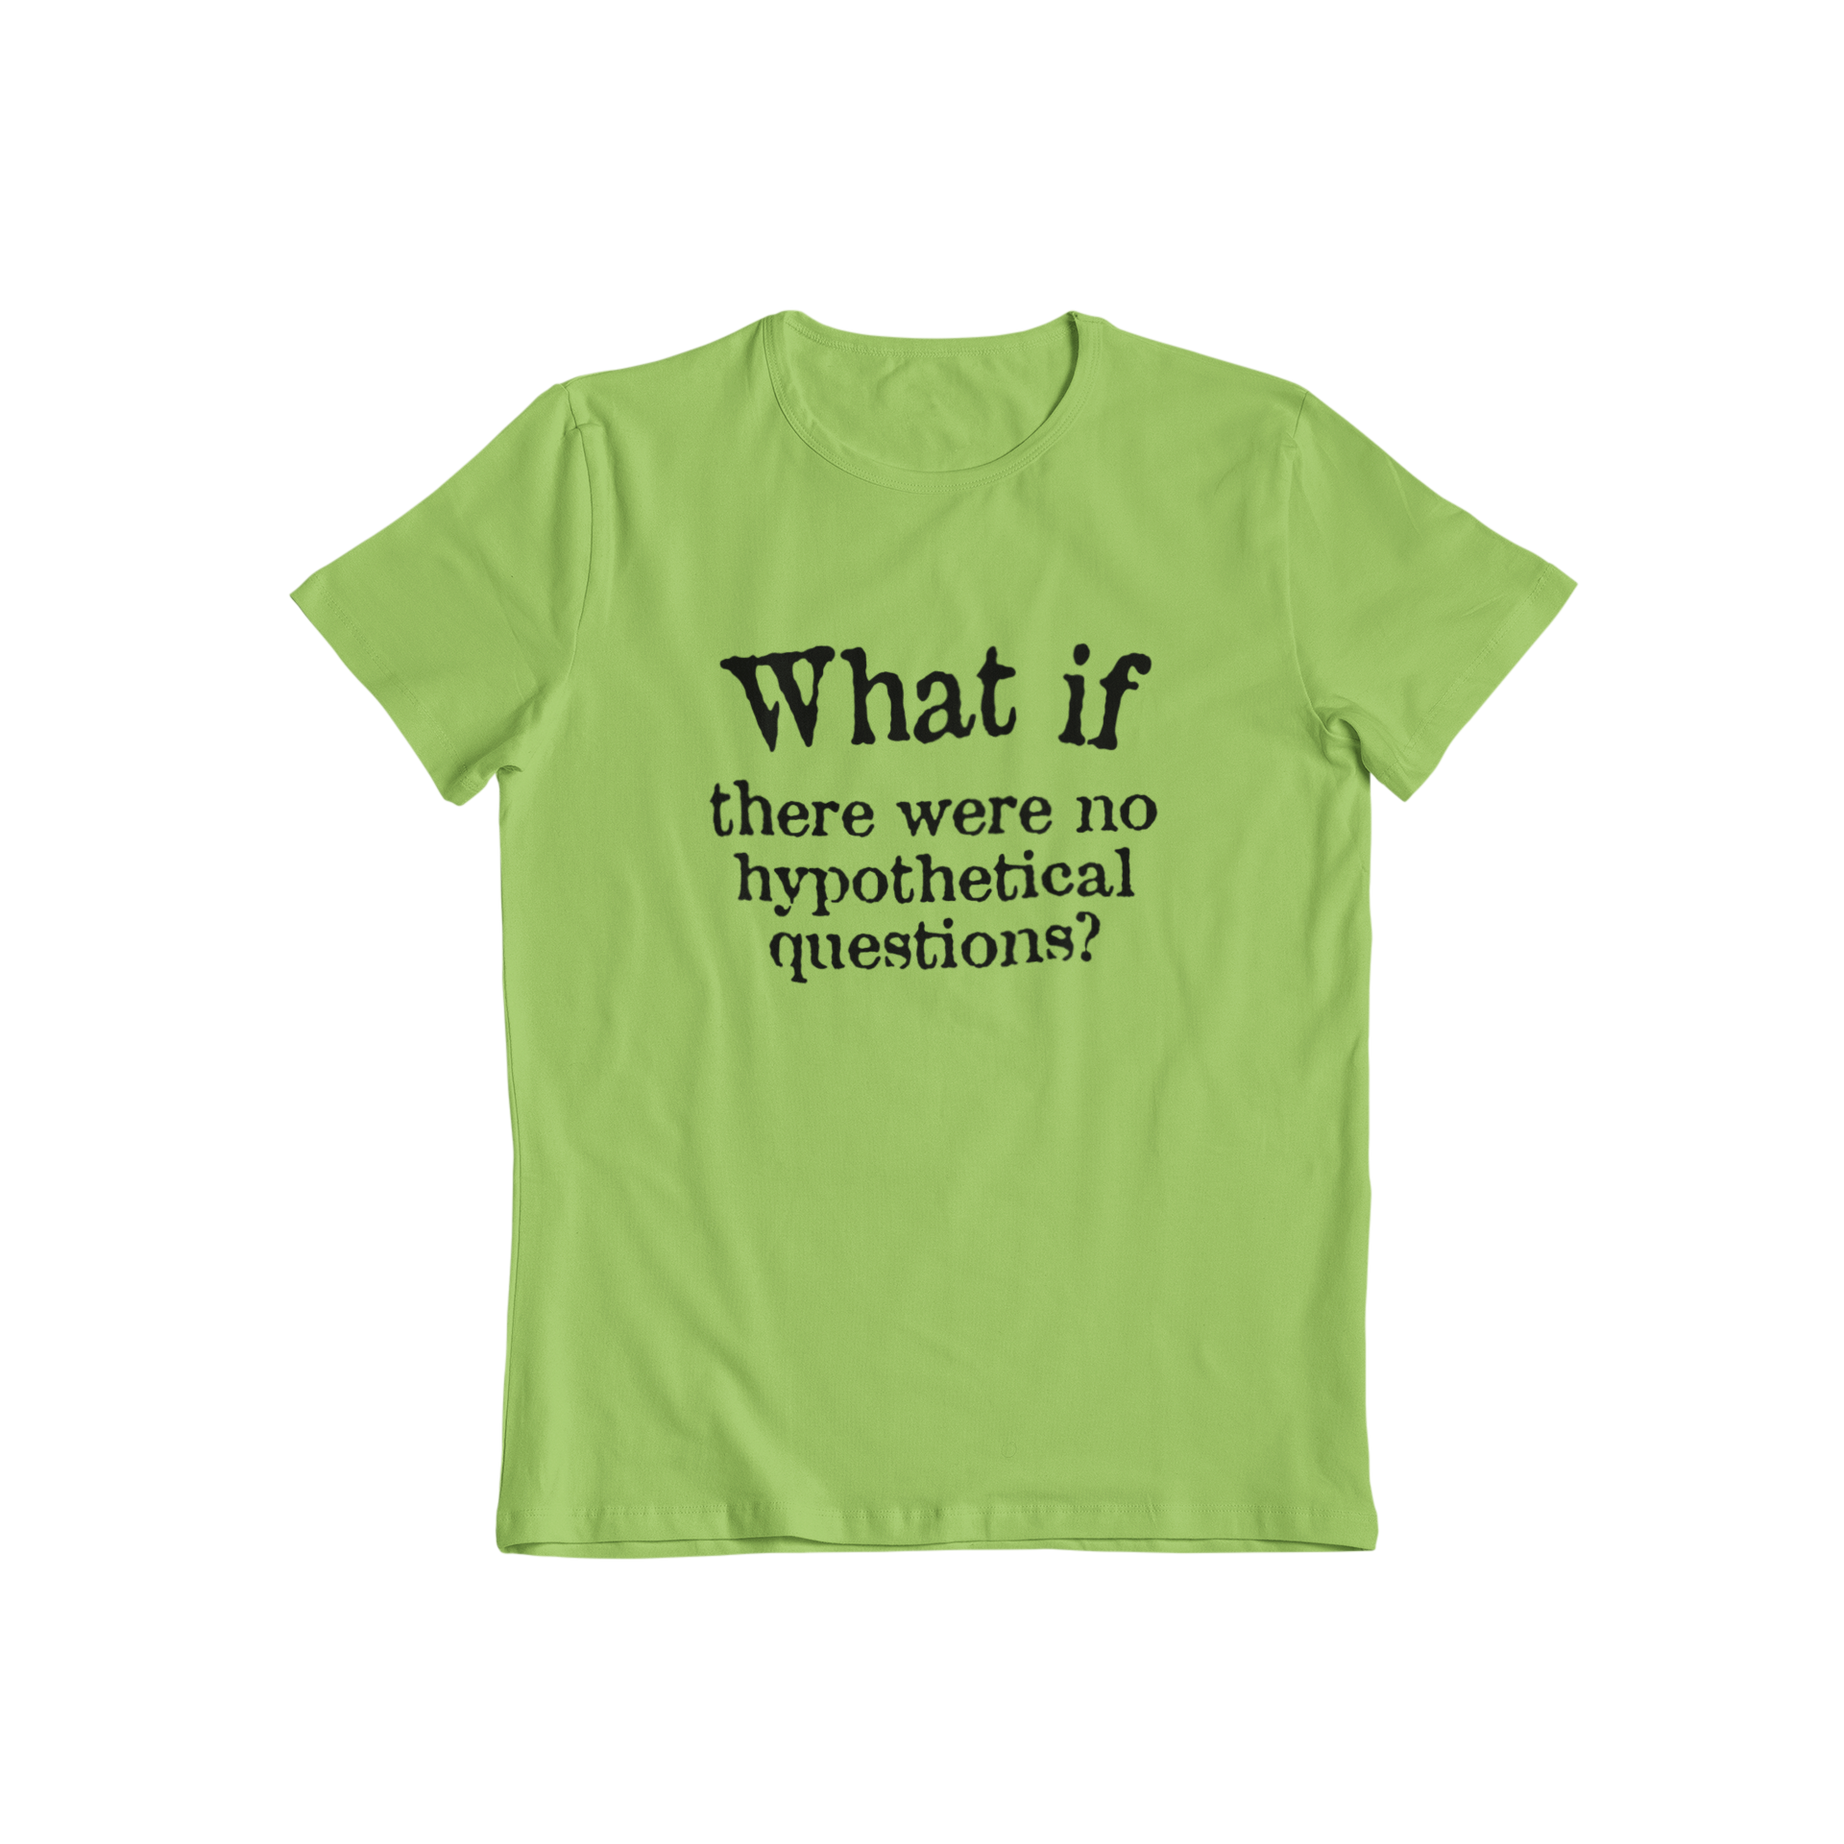 Unleash your inner philosopher with our What If T-shirt. This classic slogan tee poses the age-old question, "what if there were no hypothetical questions?" Rhetorical or not, this shirt is sure to spark some interesting conversations.